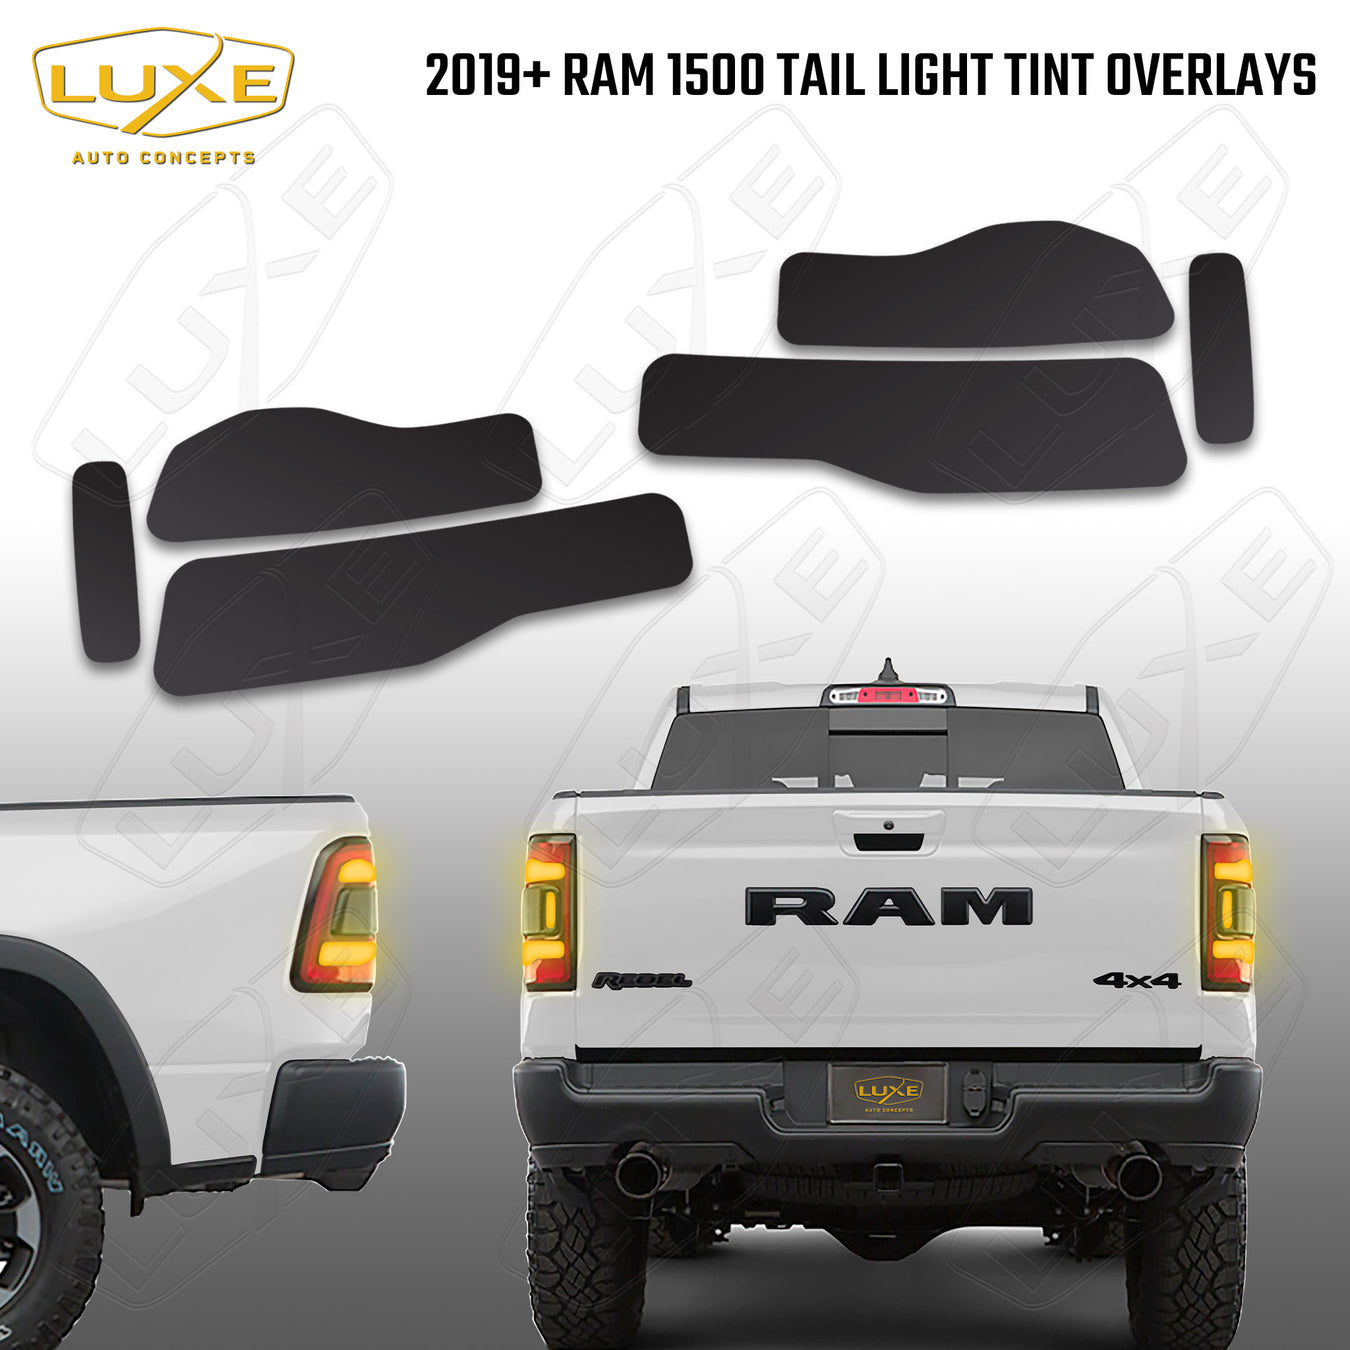 RAM 1500 Products